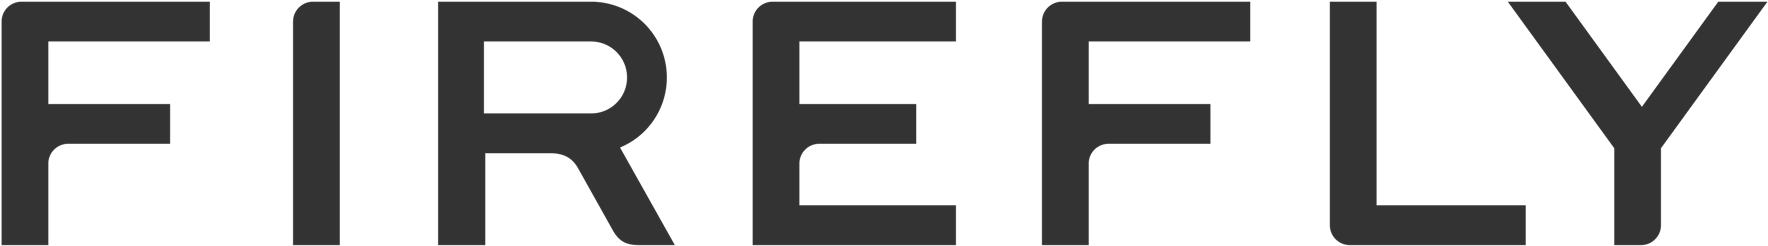 A Black And Grey Letter E